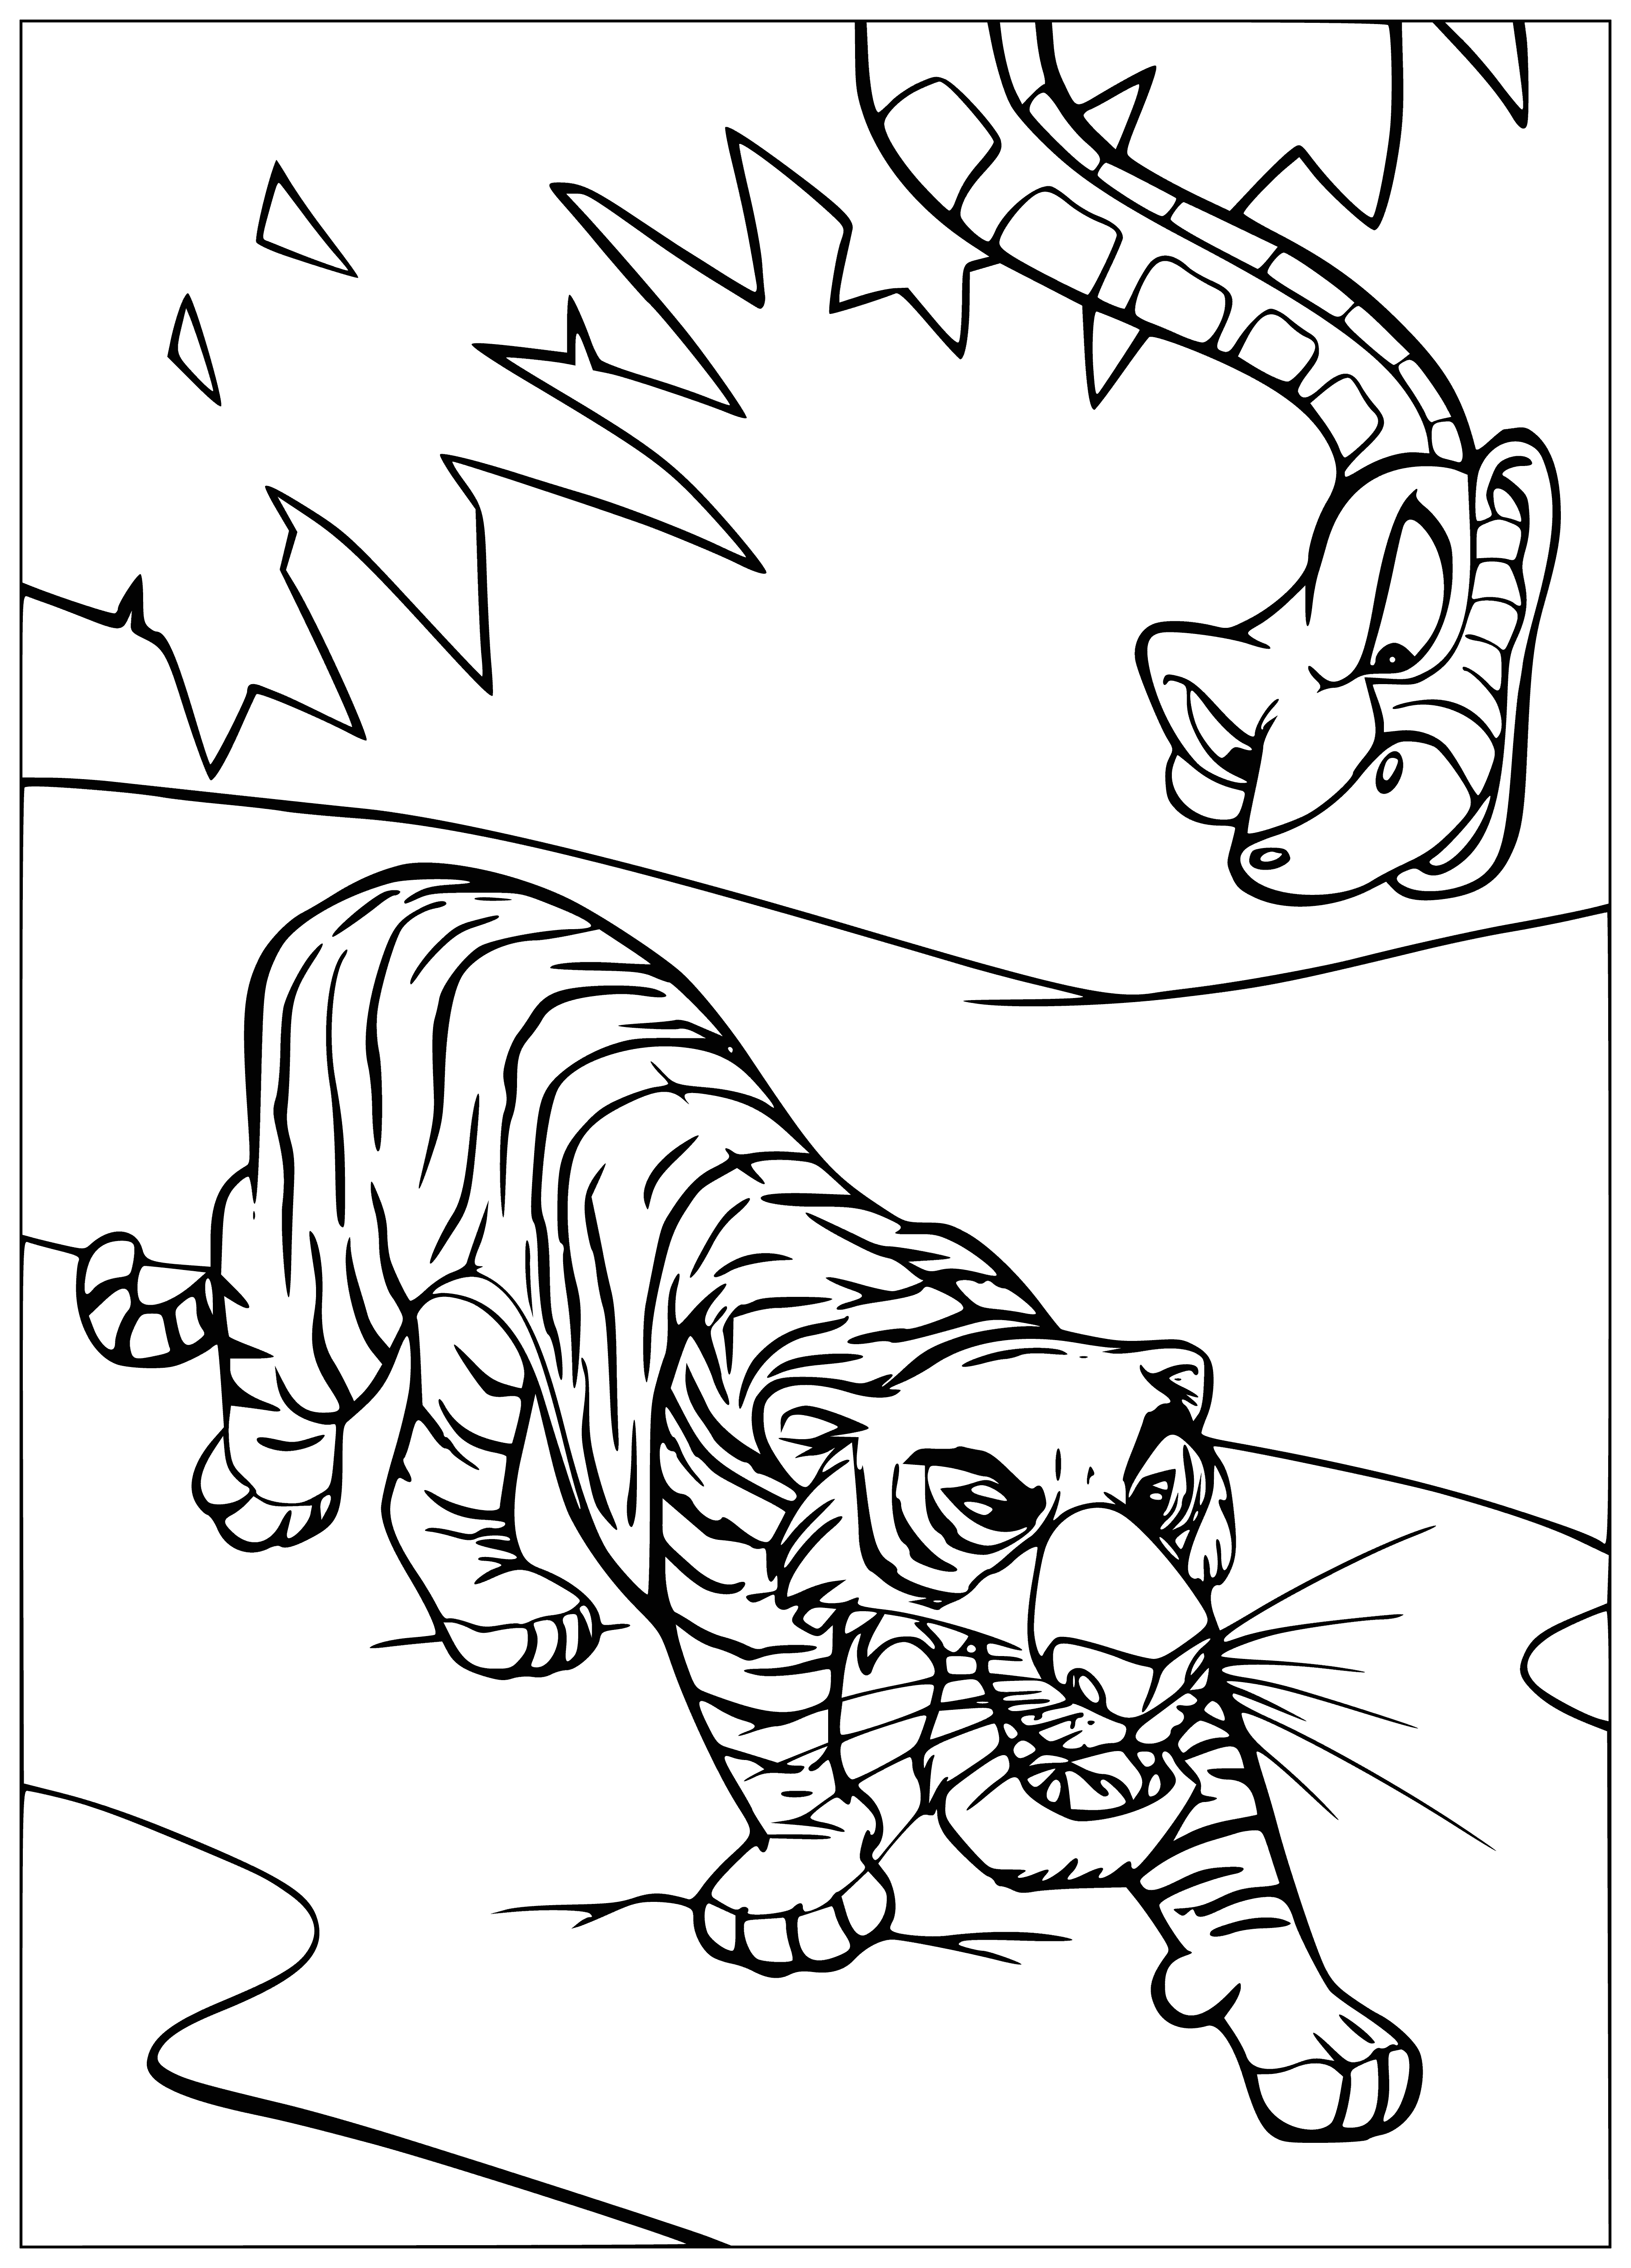 coloring page: Sher Khan and Kaa face off in the jungle, teeth and tongue bared in a fierce stare down.